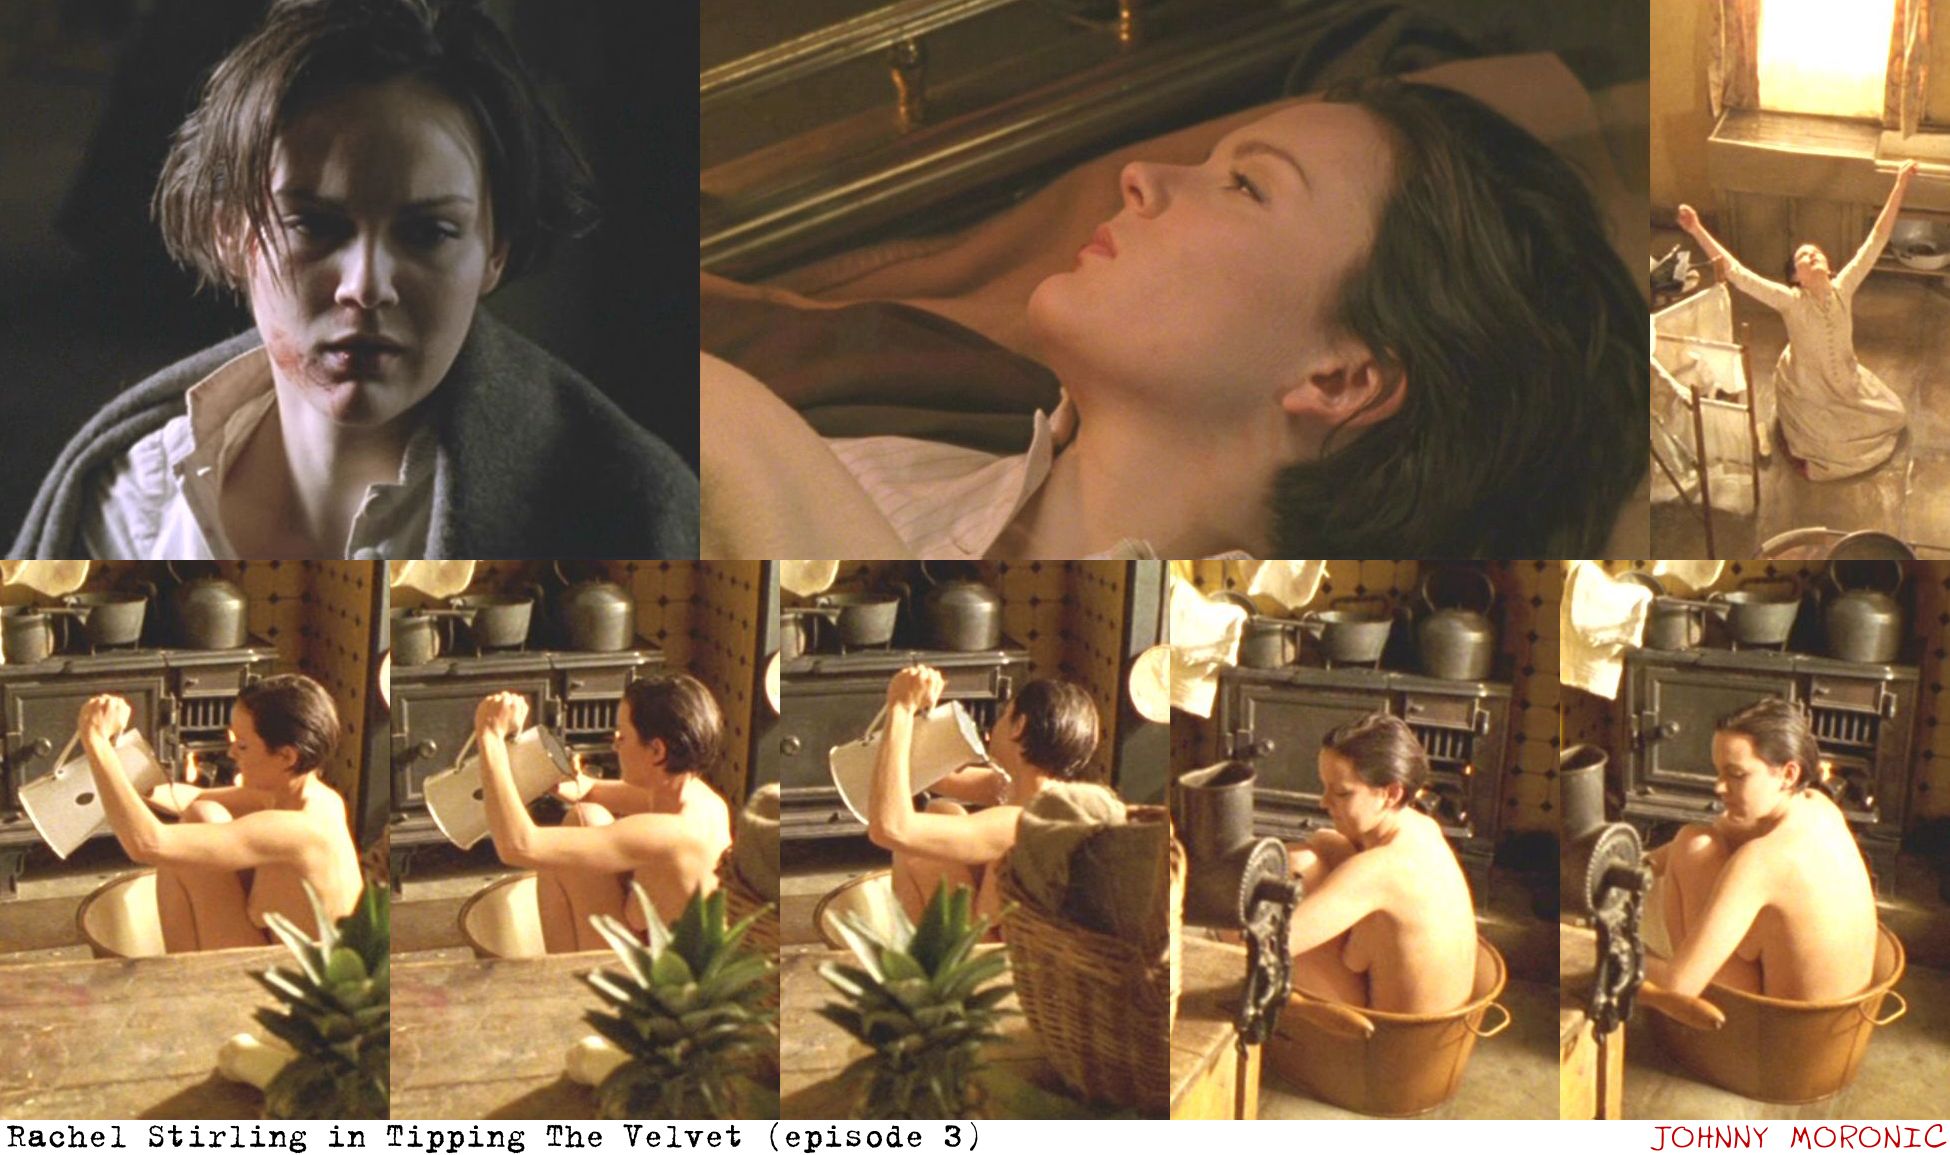 Rachael Stirling nude pics.